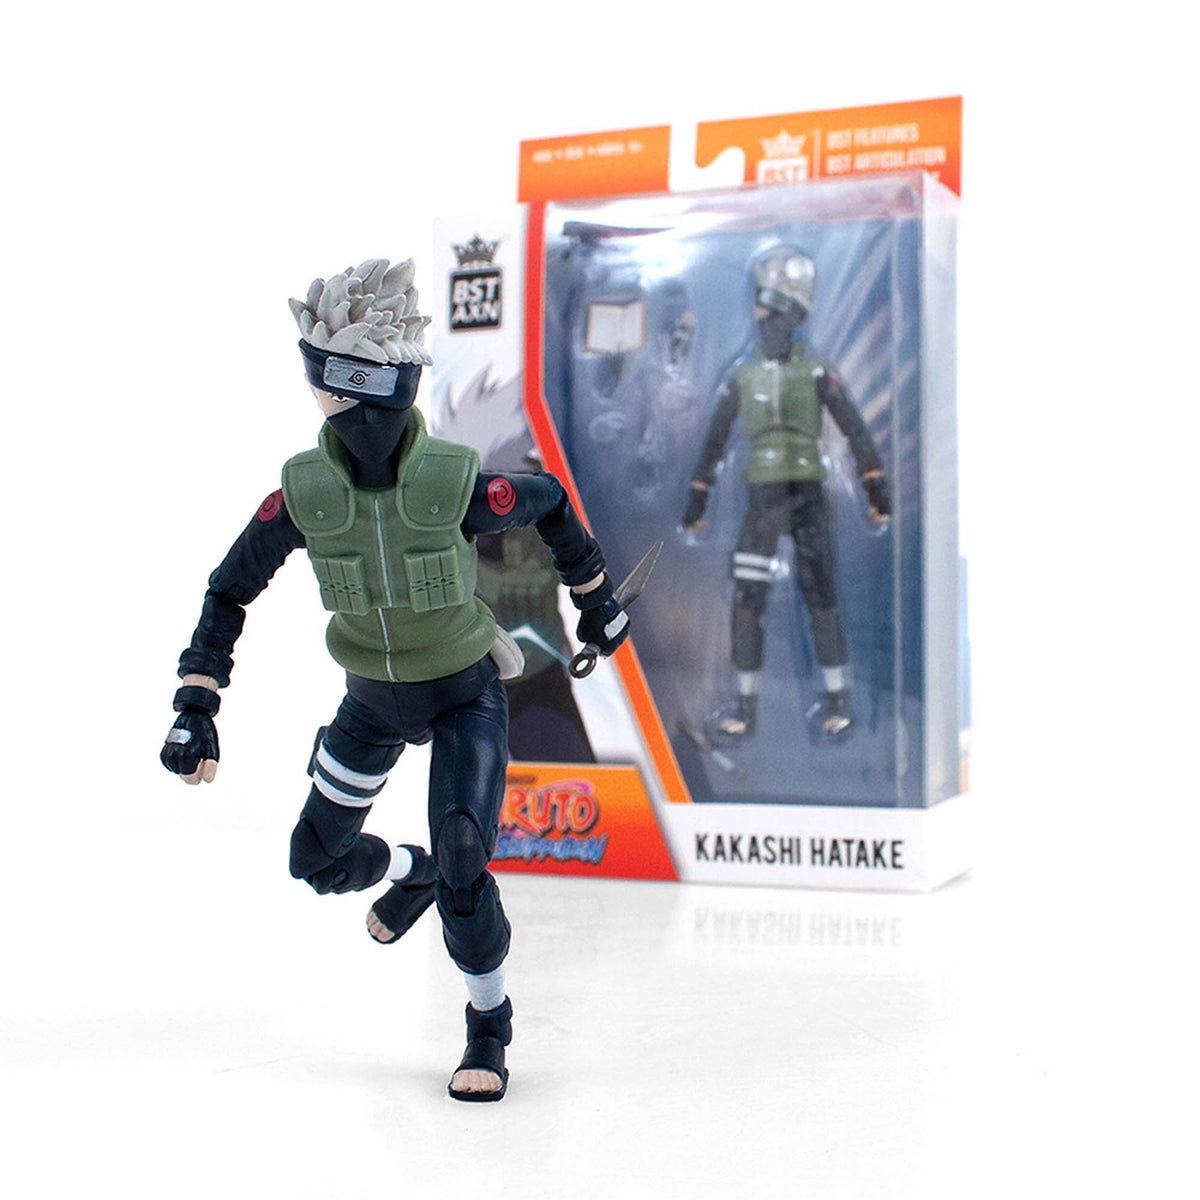 RED PLANET GROUP Toys & Games Kakashi Hatake Action Figure, Naruto, 5 Inches, 1 Count 850795008701